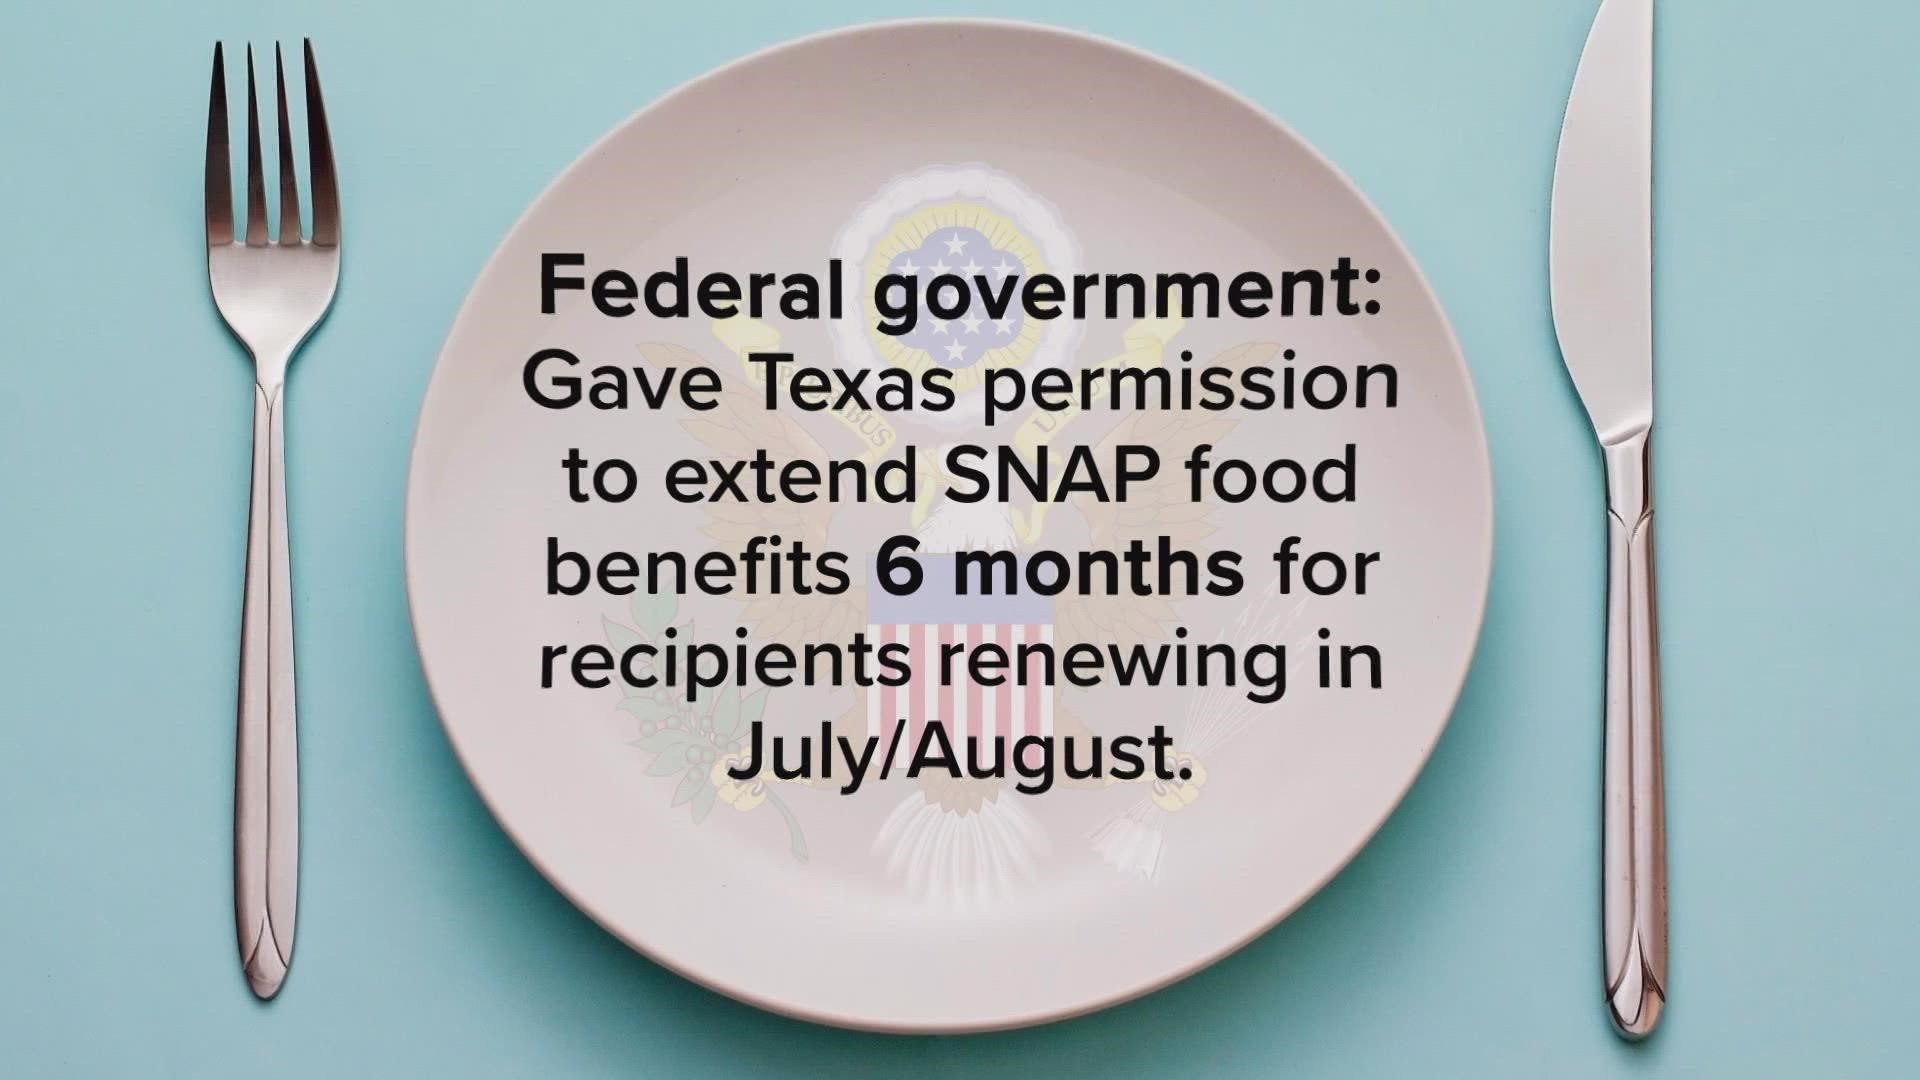 There are 332,798 applications for food benefits waiting to be processed in Texas.